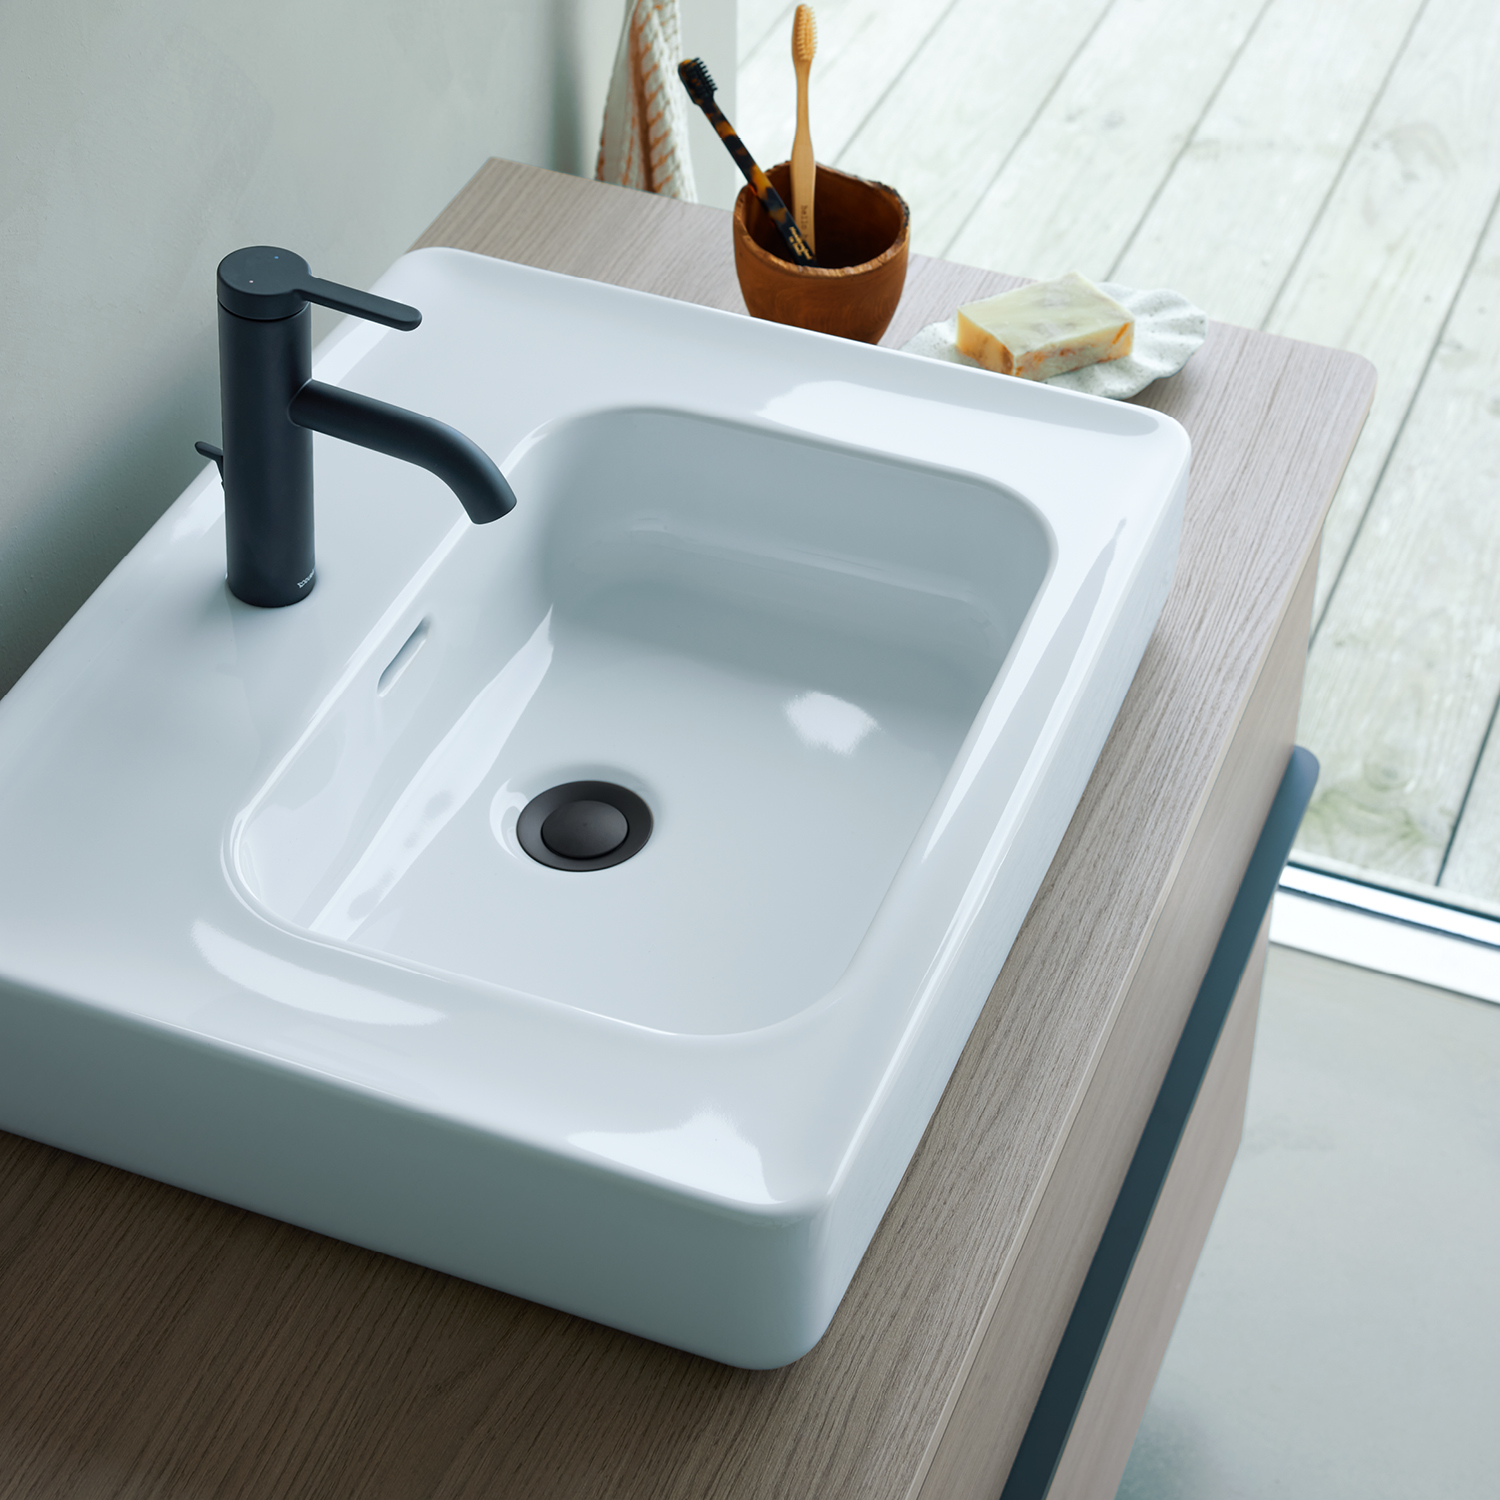 Soleil by Starck countertop washbasin with overflow
